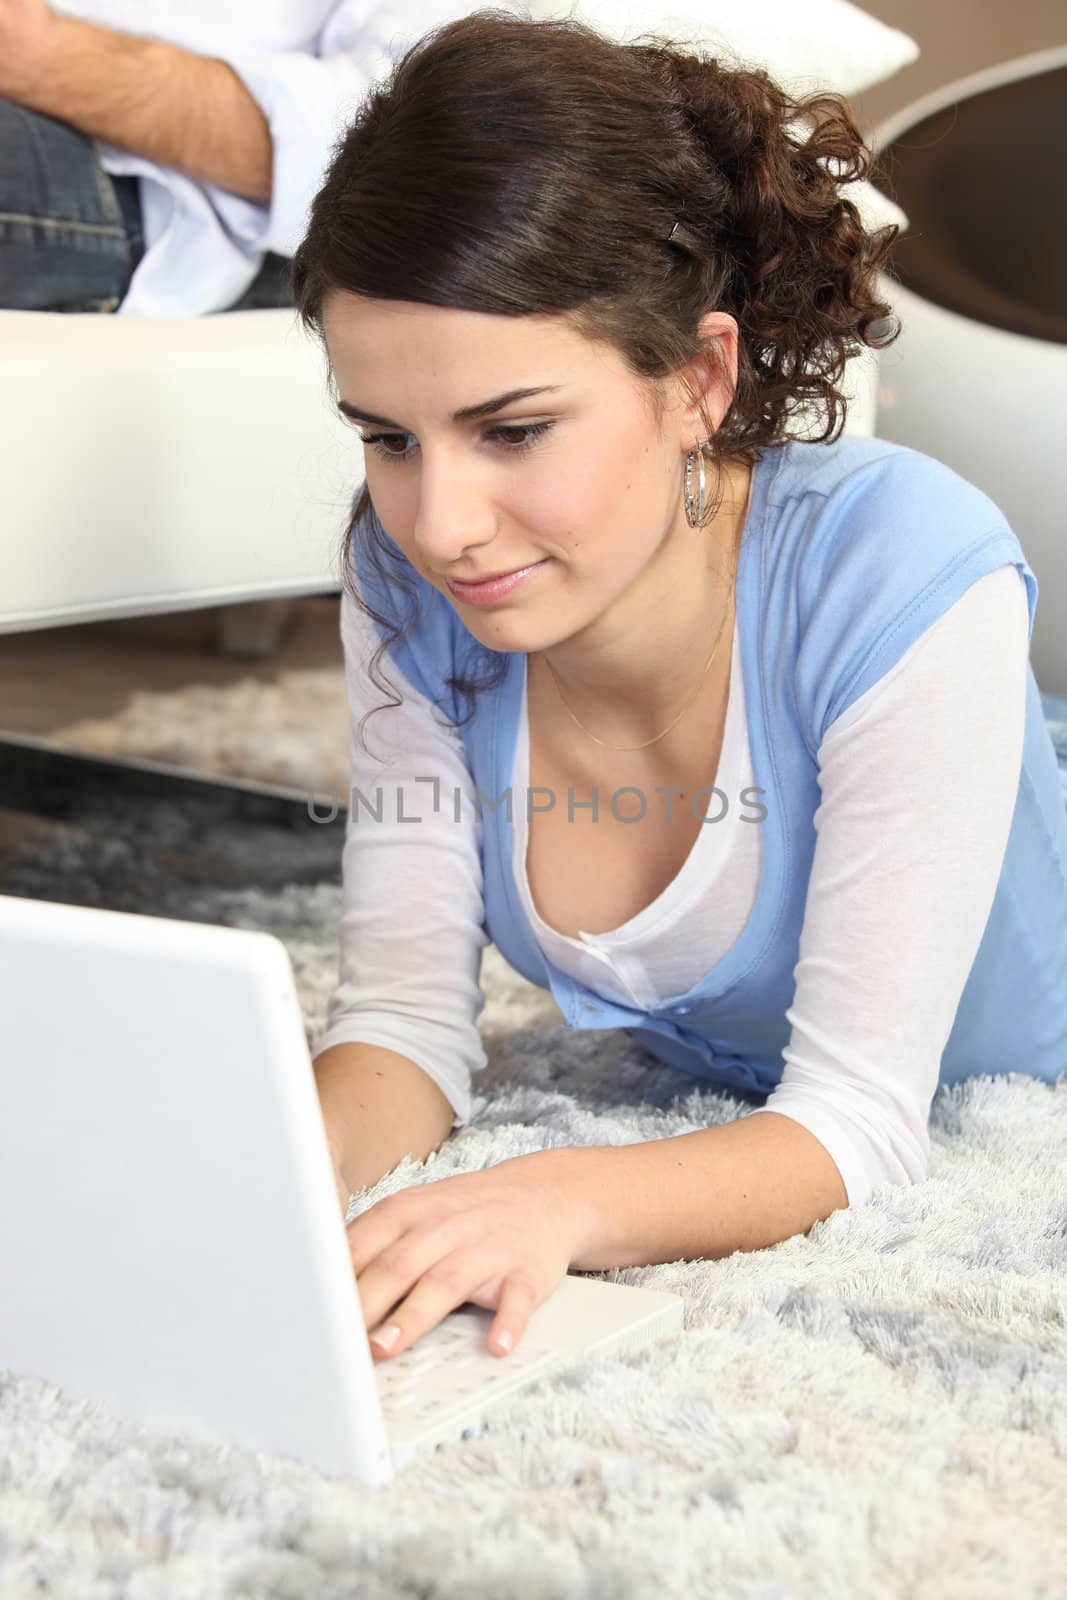 Young woman using a laptop on the floor at home